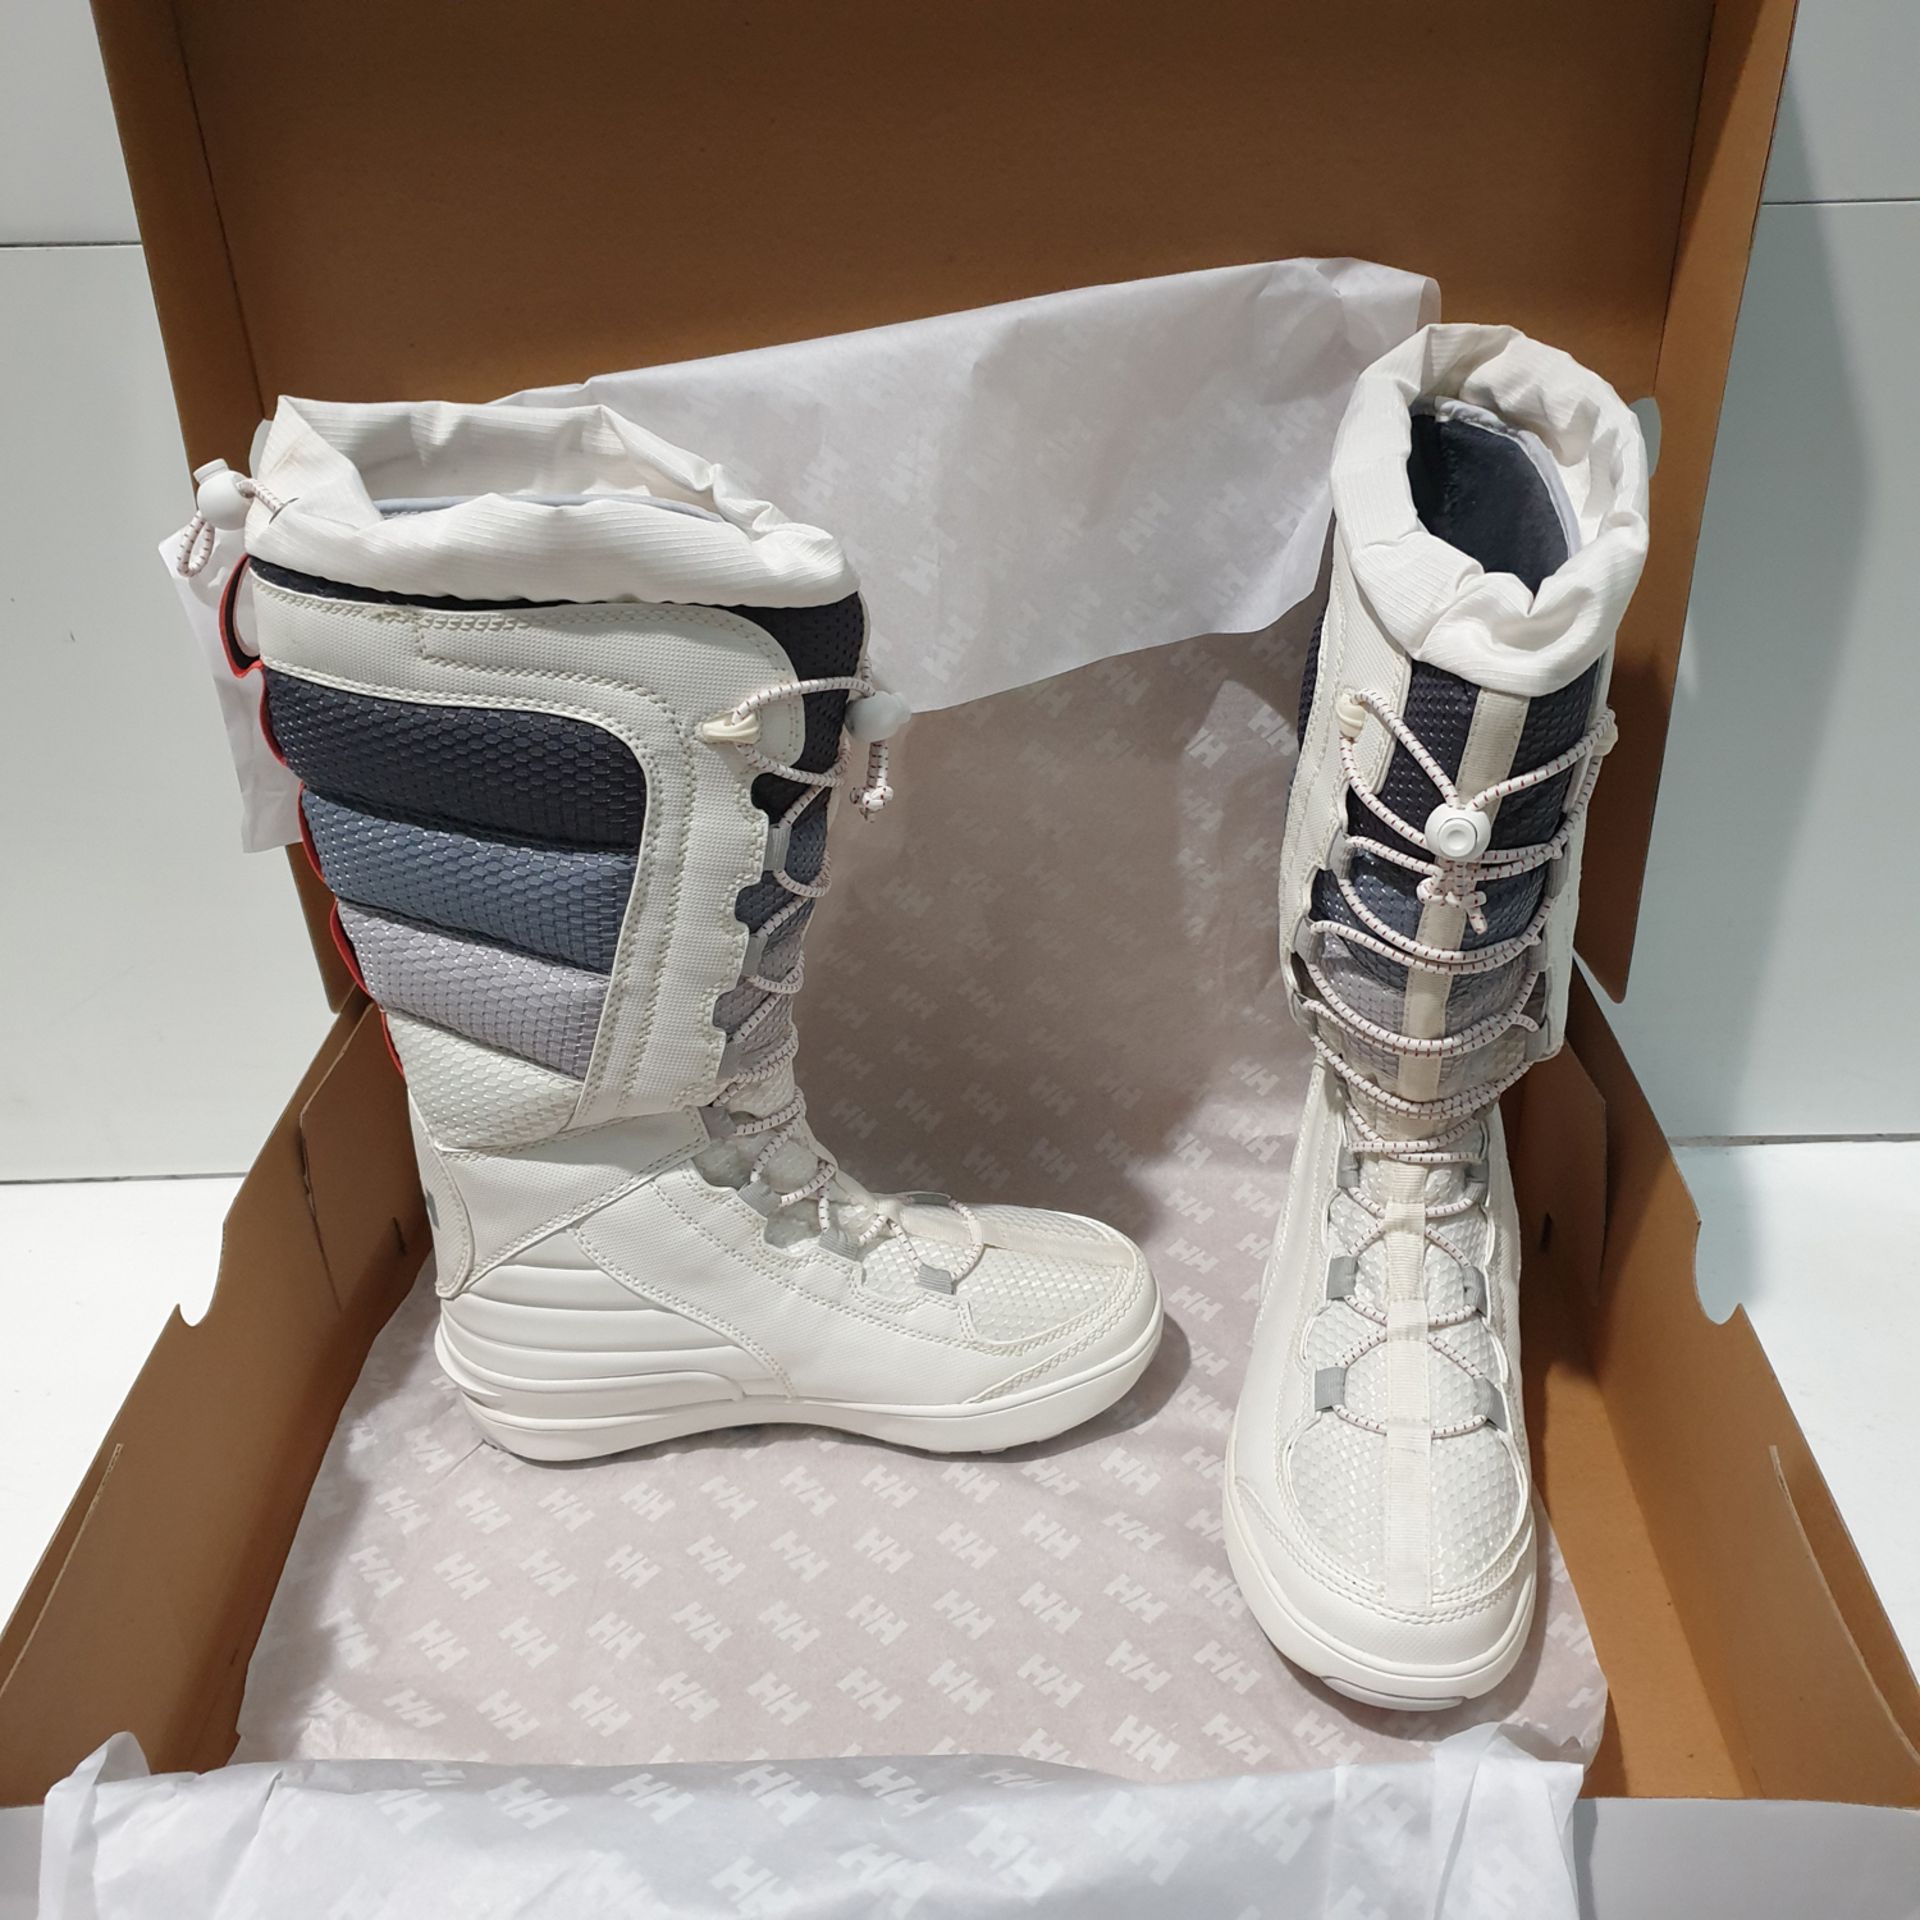 Helley Hansen W Equipe Snow Boots Size 5. - Image 3 of 6